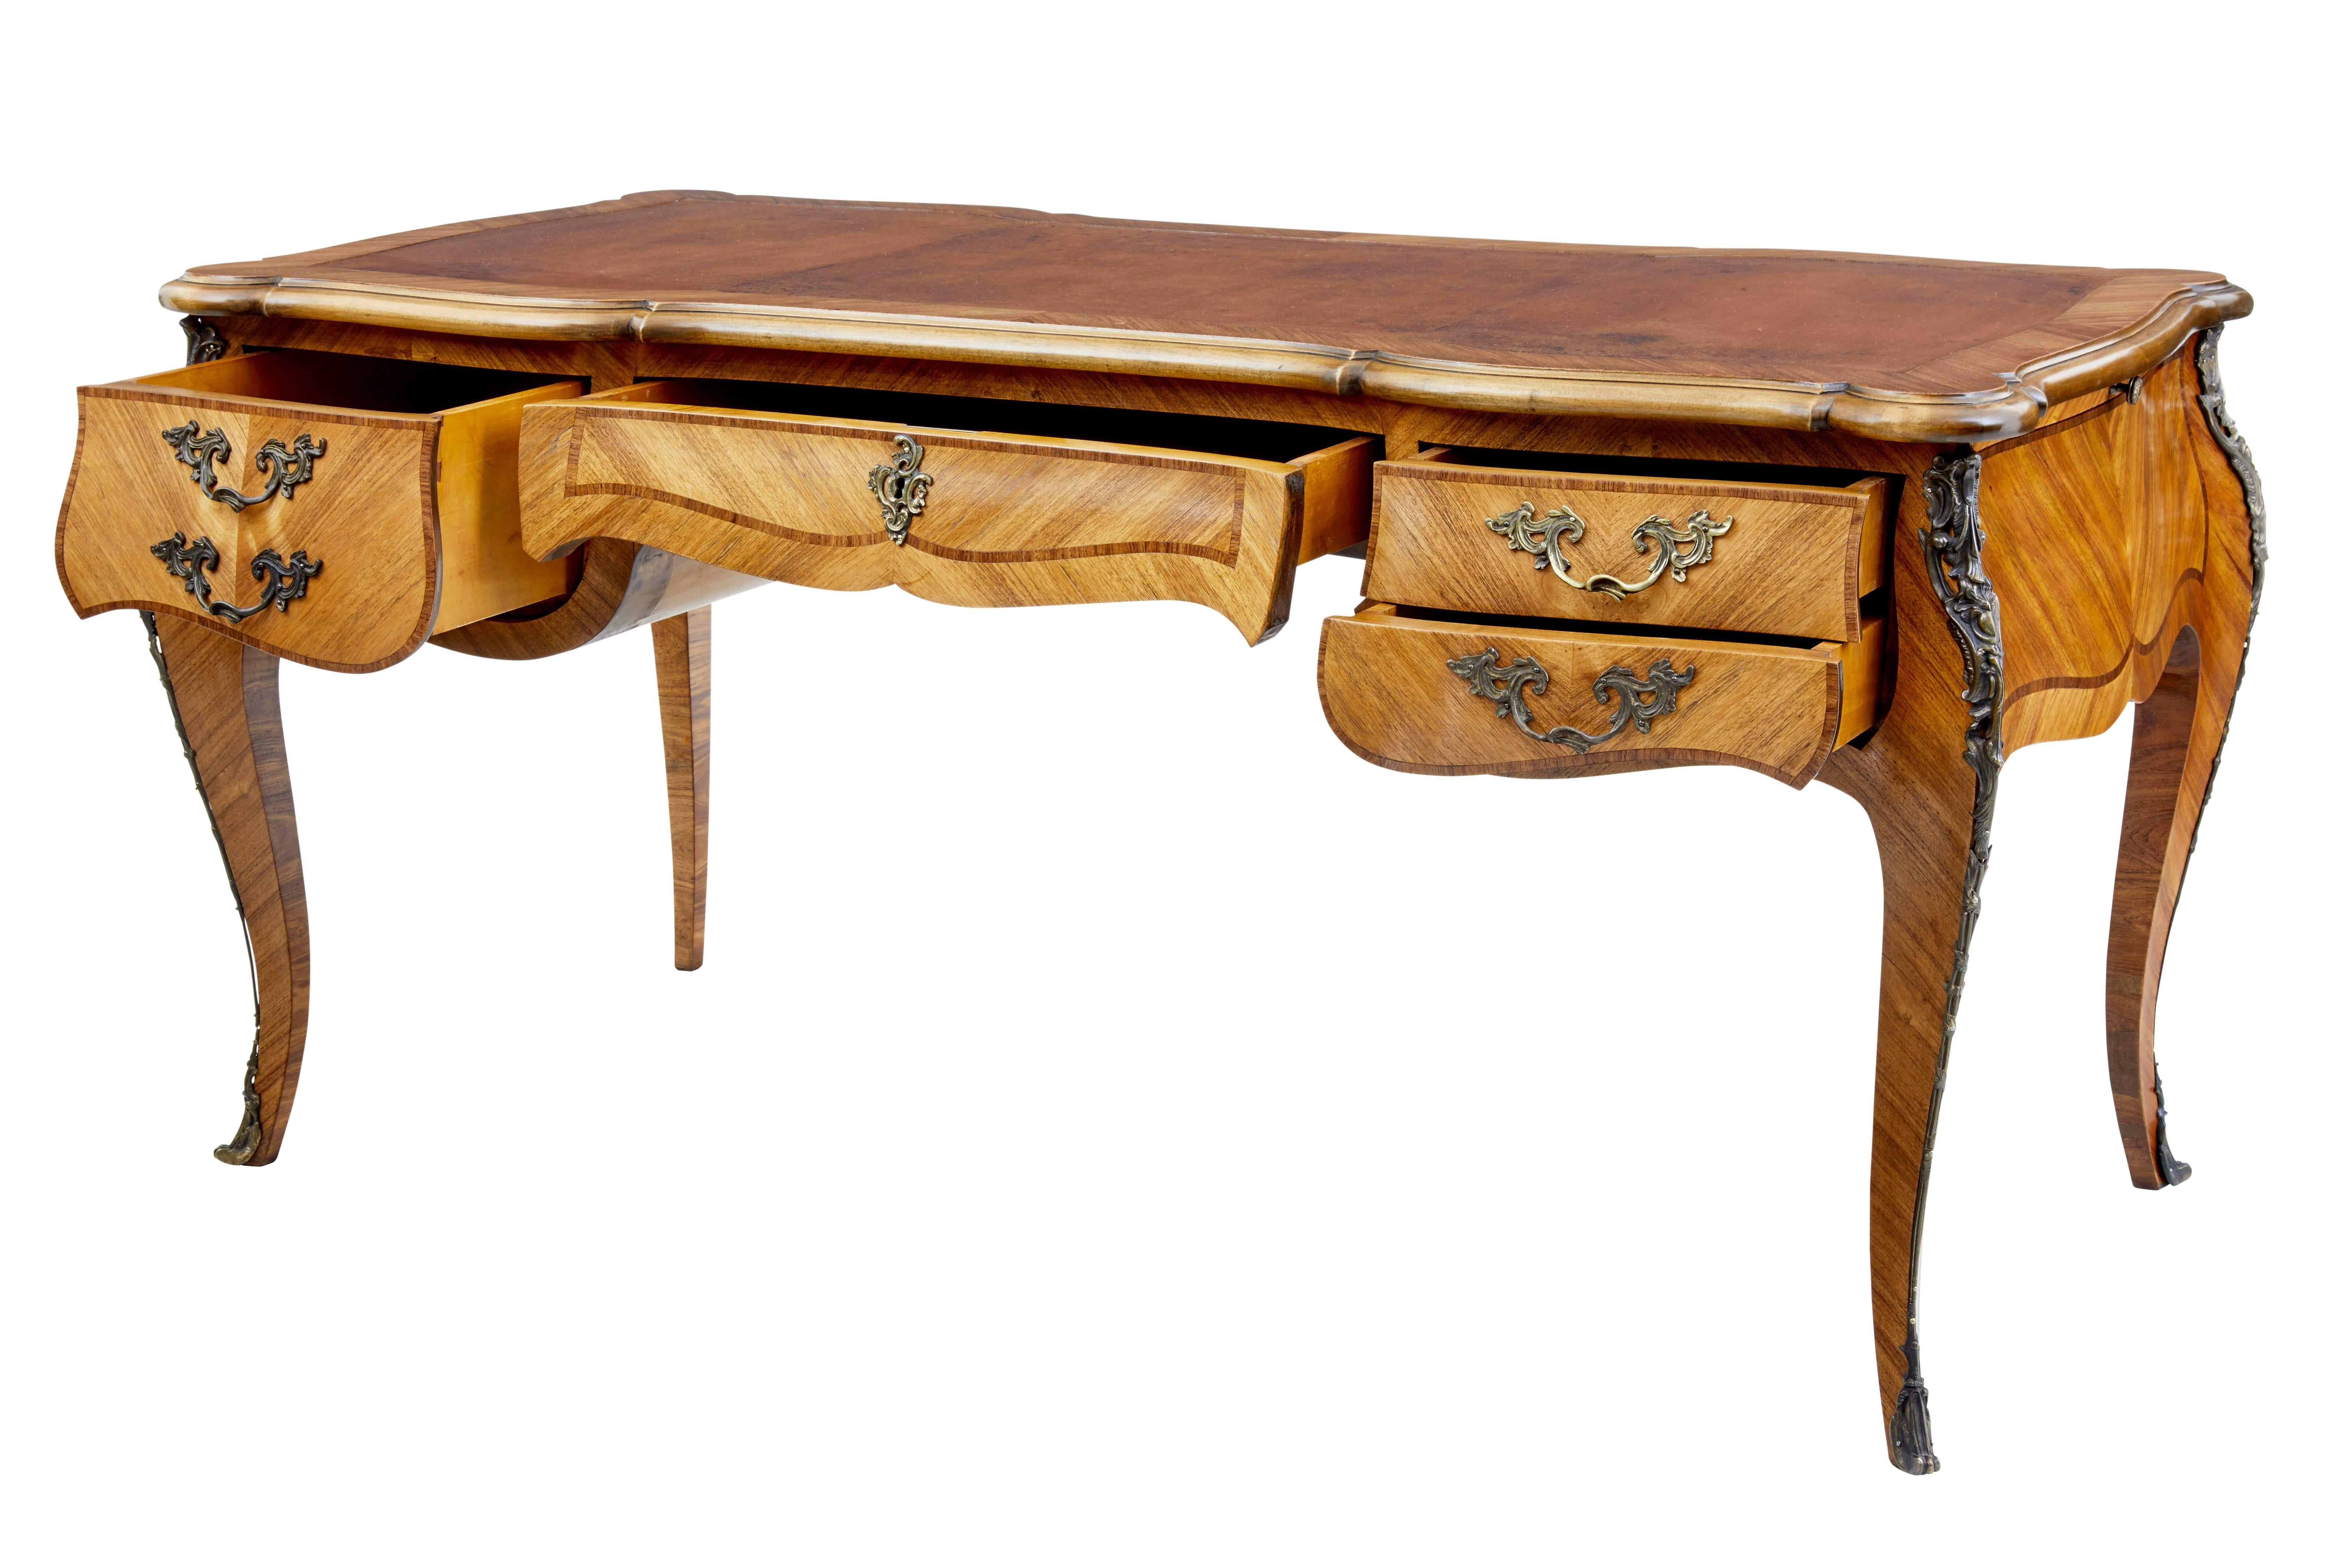 Here we offer a beautiful French bureau plat writing desk, circa 1890.

Original leather writing surface with tooling, shaped writing surface. Single drawer above the knee hole with a single deep drawer to the left and two drawers to the right.